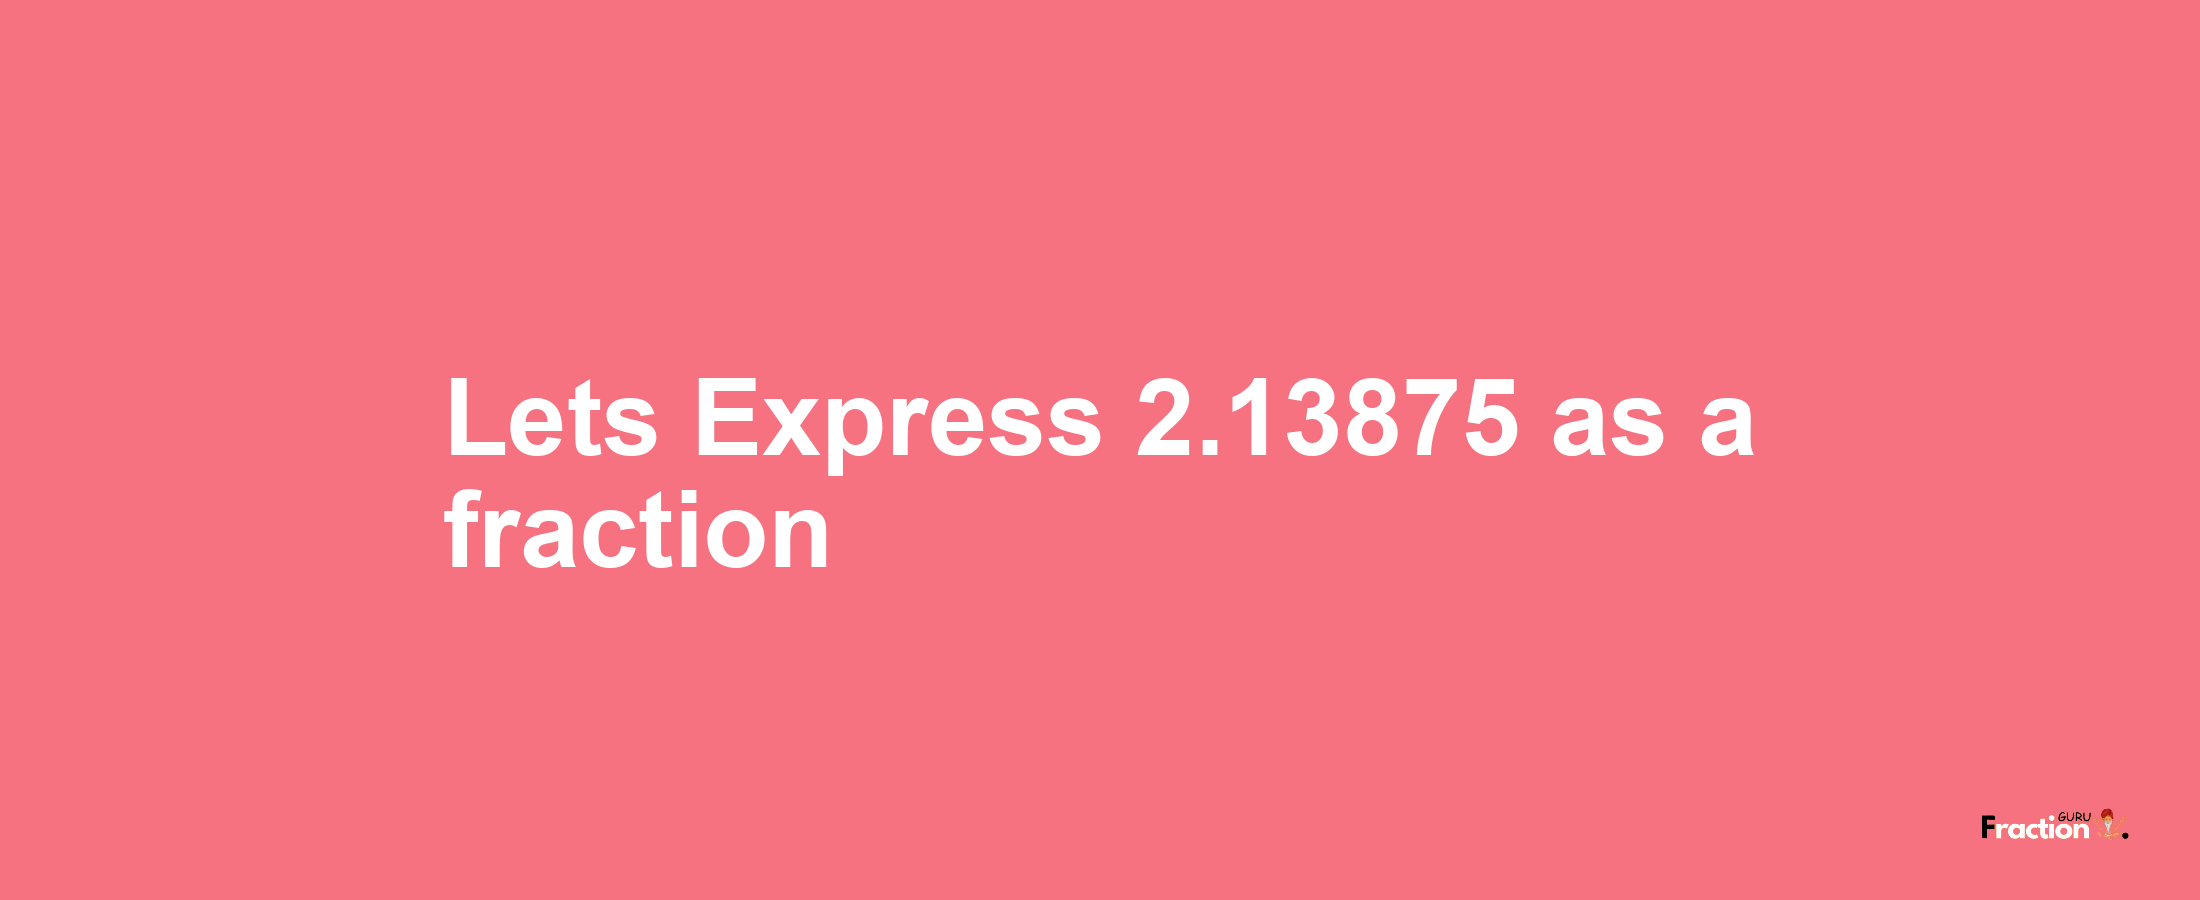 Lets Express 2.13875 as afraction